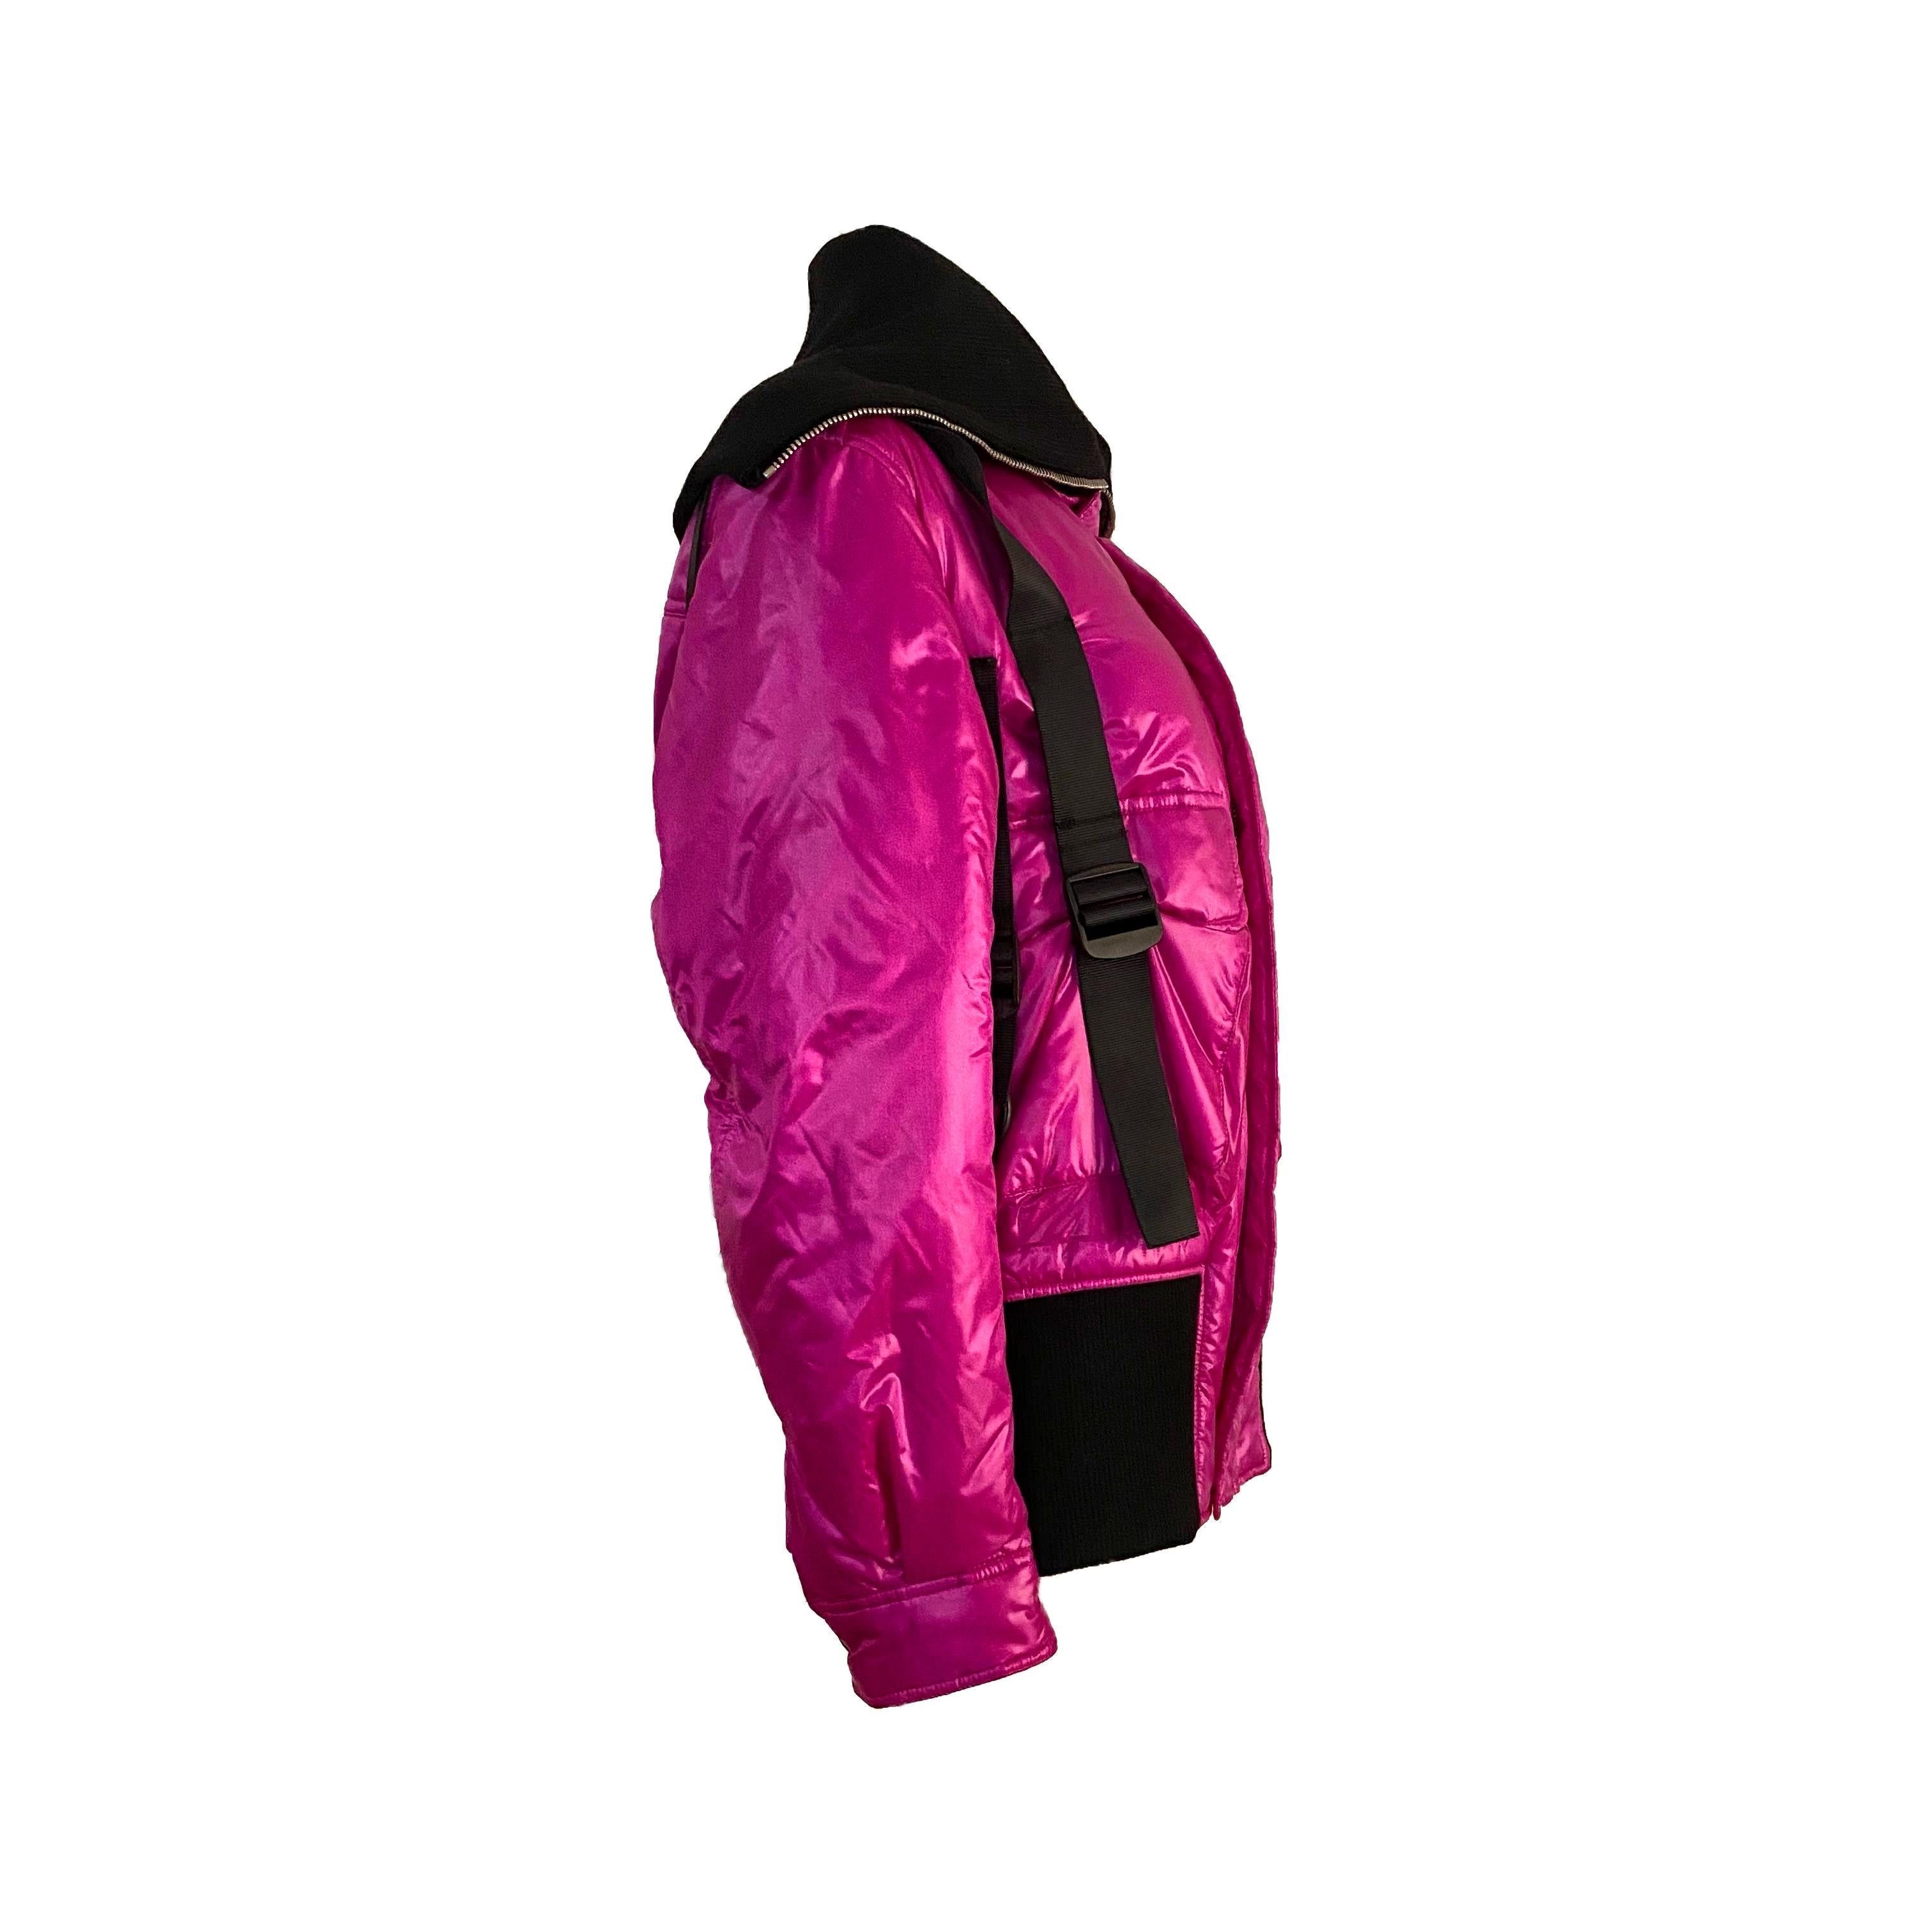 Dolce & Gabbana Fall/Winter 2003 Hot Pink cargo Parachute Bondage Bomber Jacket.
Multiple black nylon fastening straps and black thick wool high collar. Two maxi pockets on the front matched by a smaller one on the left sleeve. Rare colorway.

Size